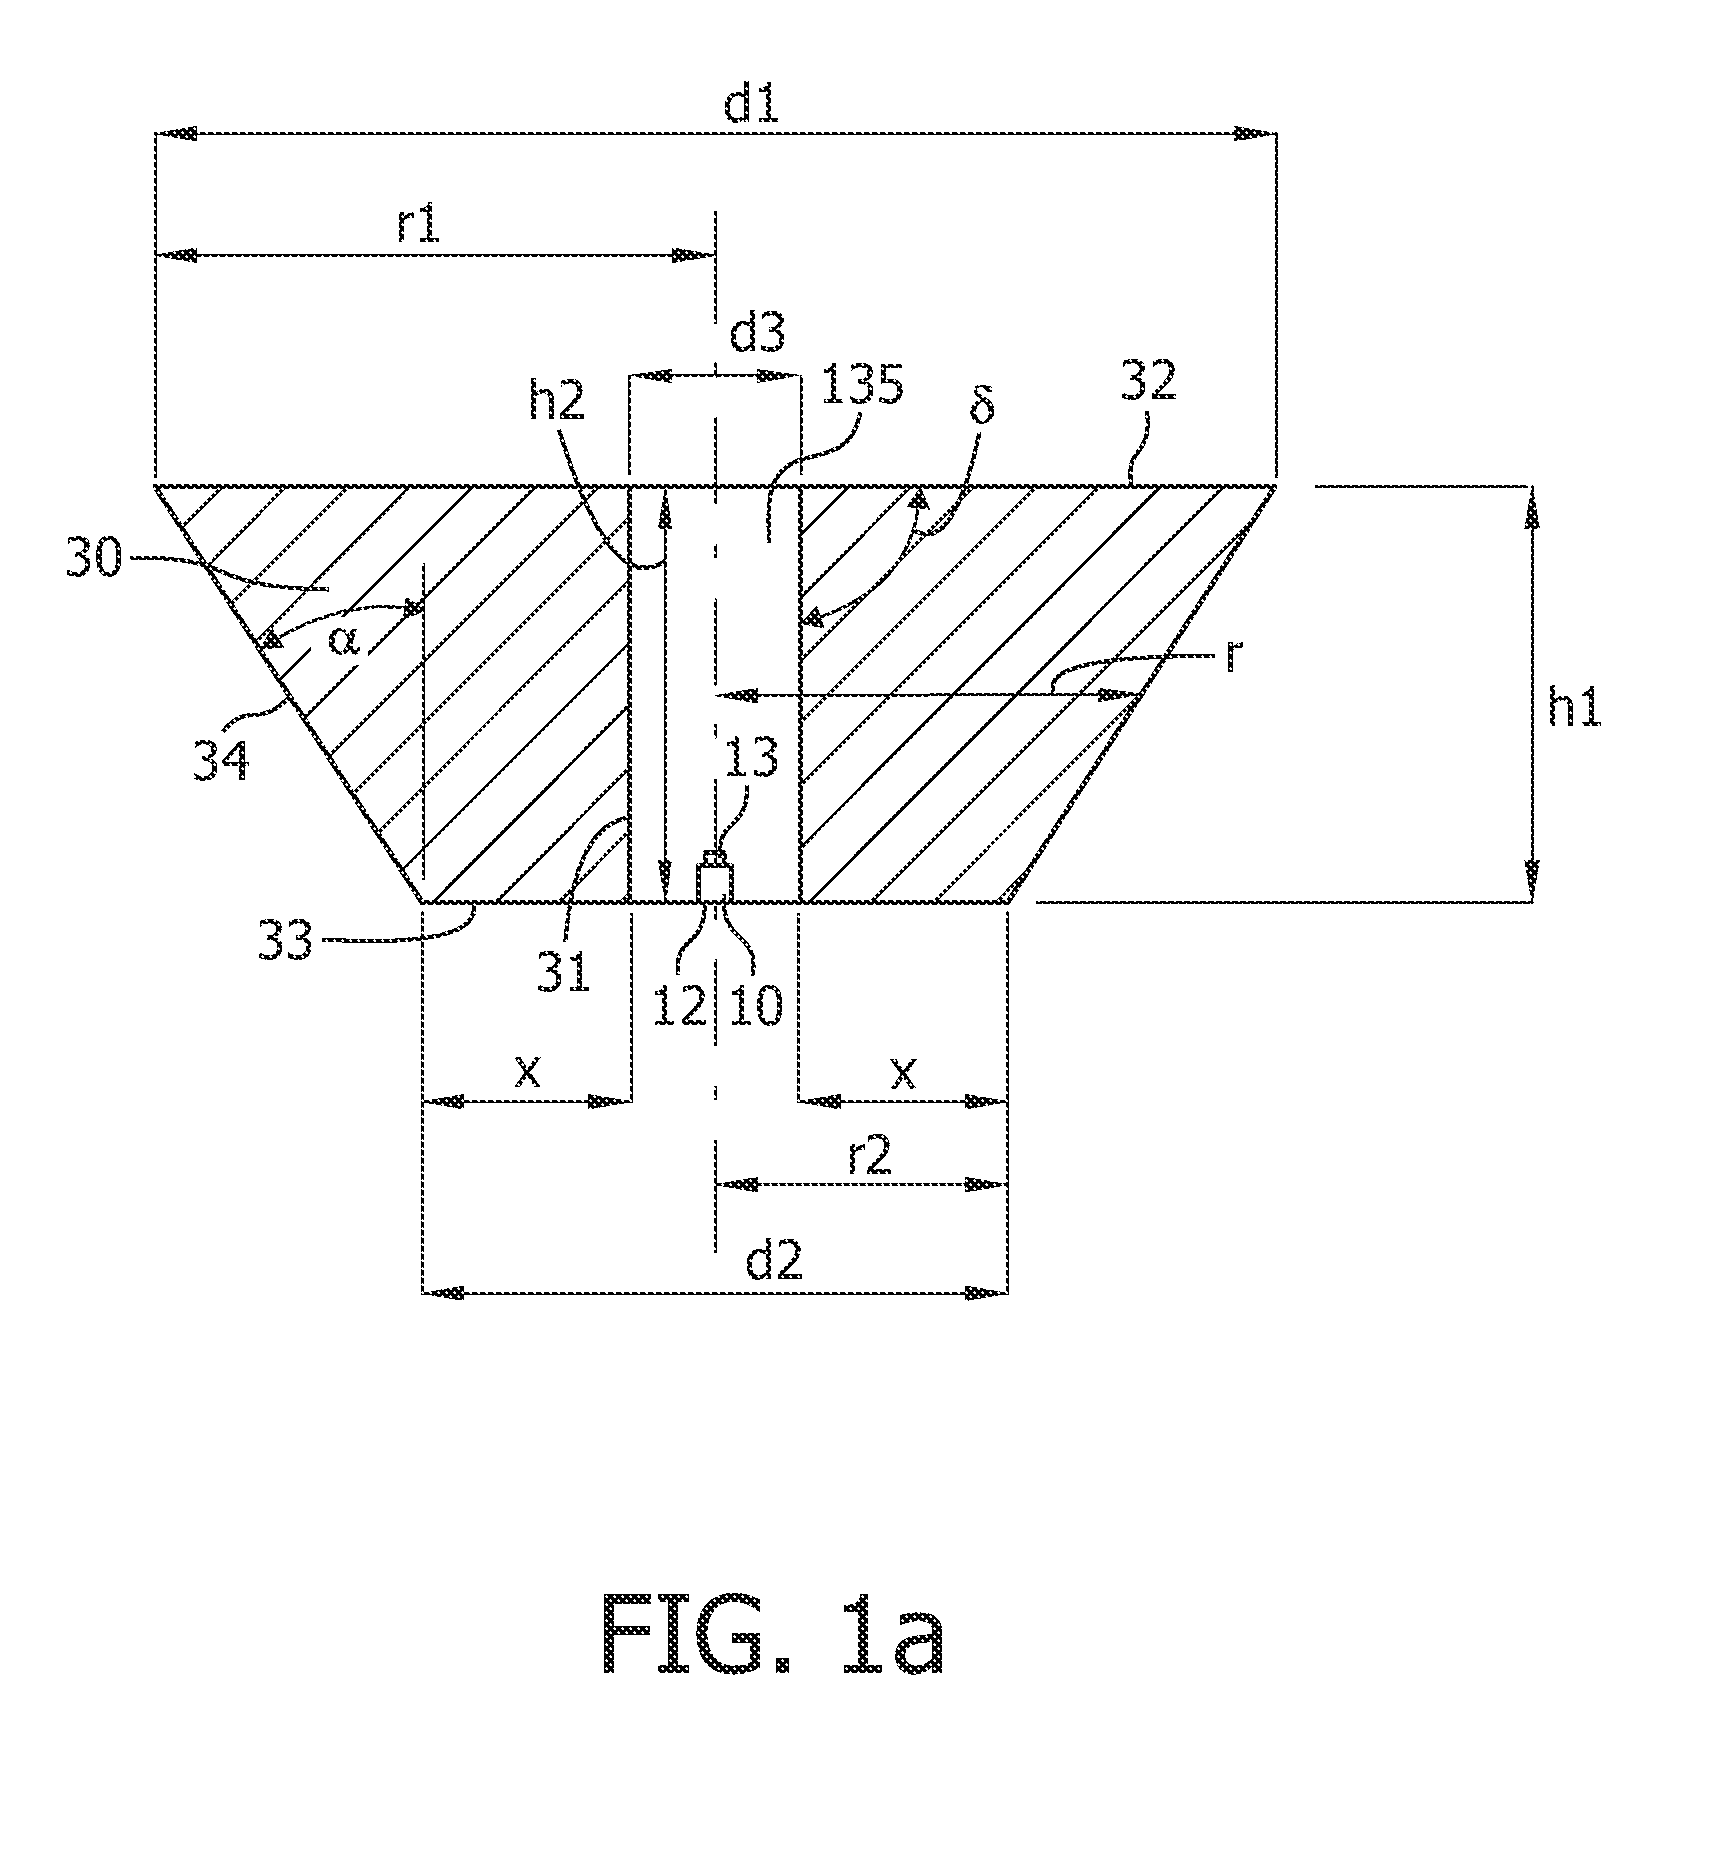 Lighting device comprising at least one LED